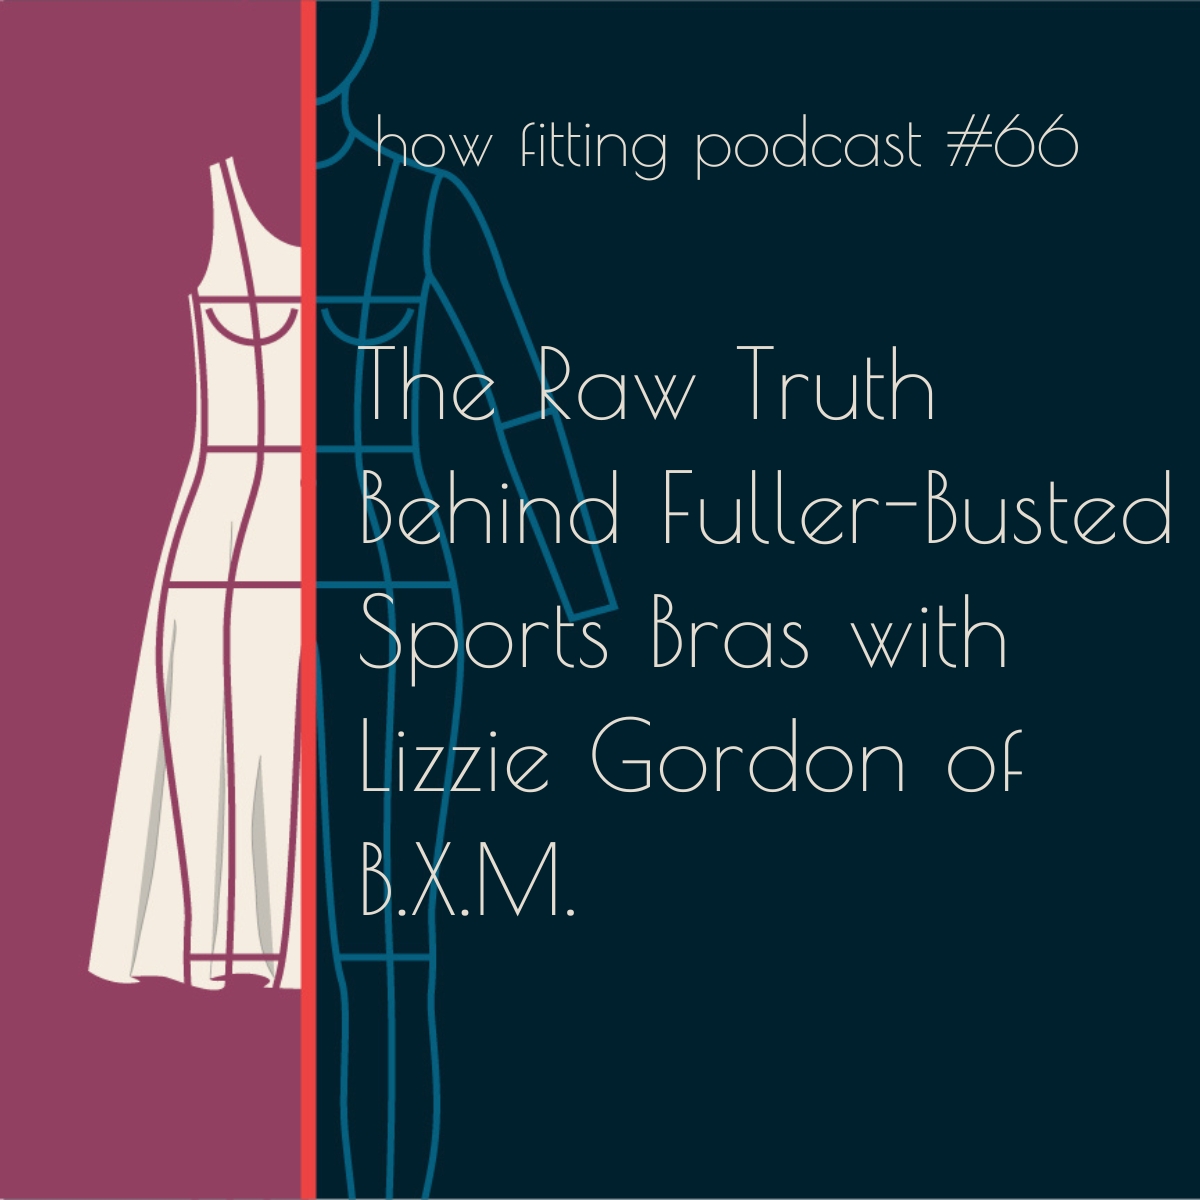 HF#66 The Raw Truth Behind Fuller-Busted Sports Bras with Lizzie